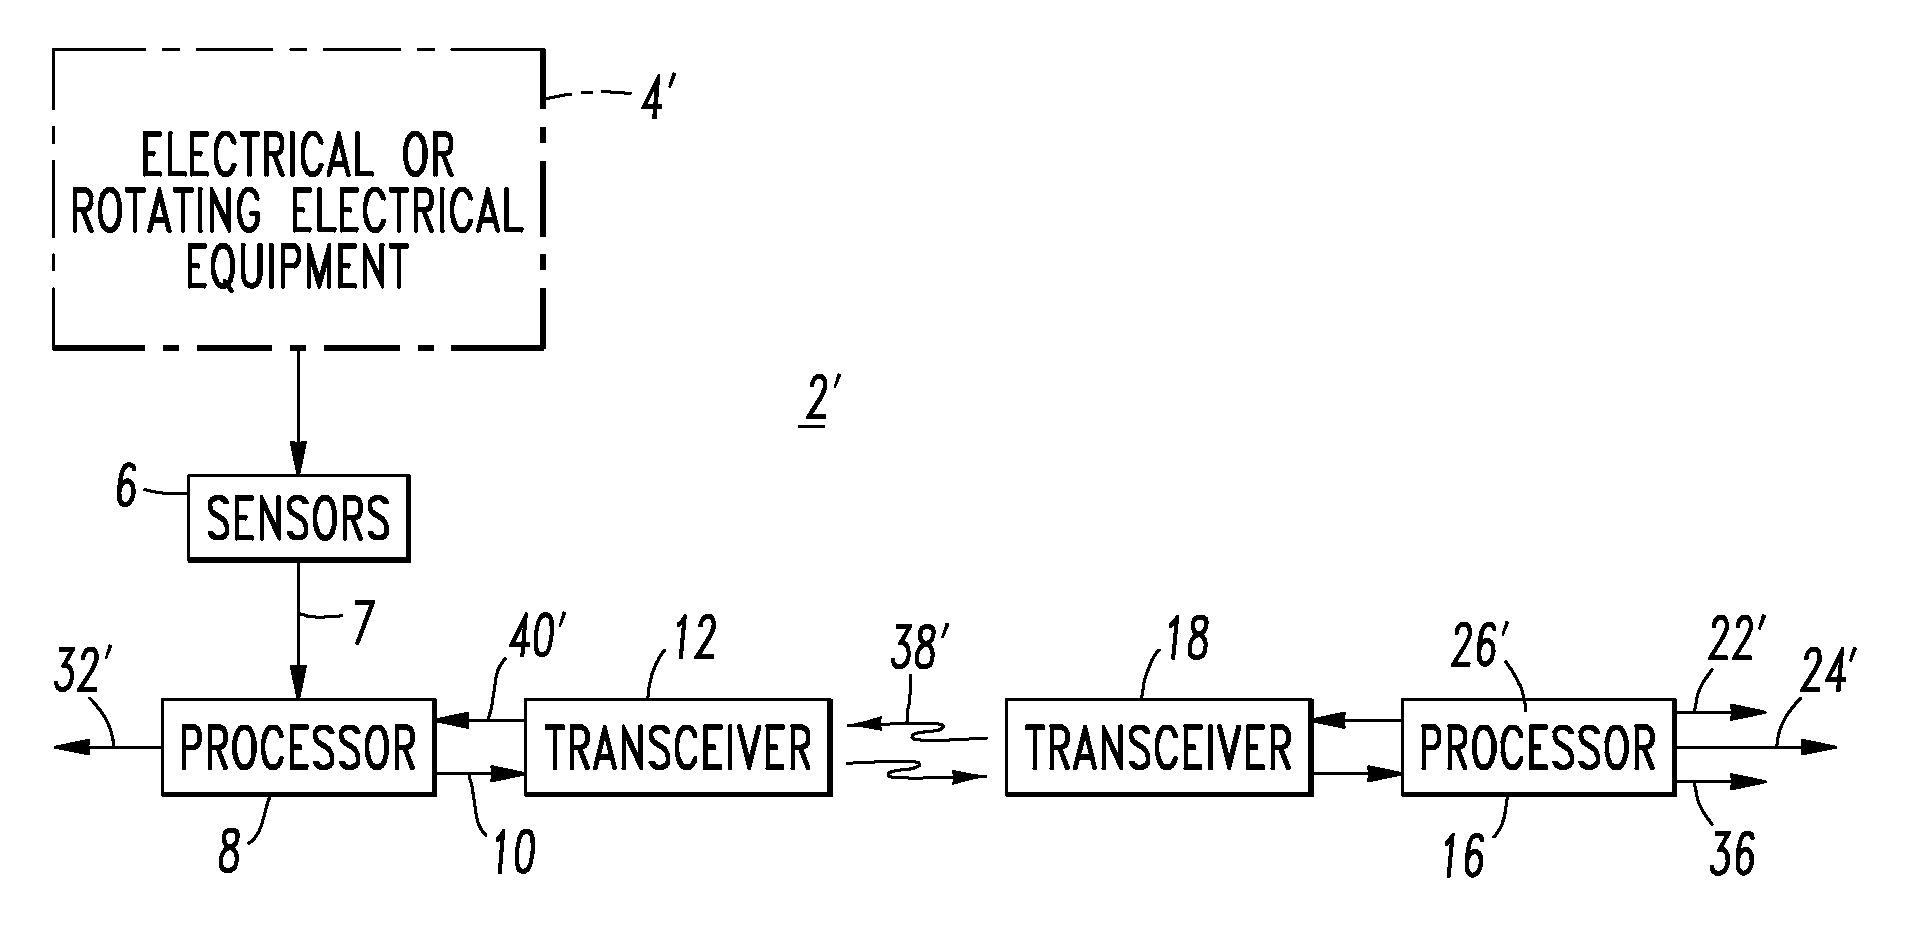 System for monitoring electrical equipment and providing predictive diagnostics therefor